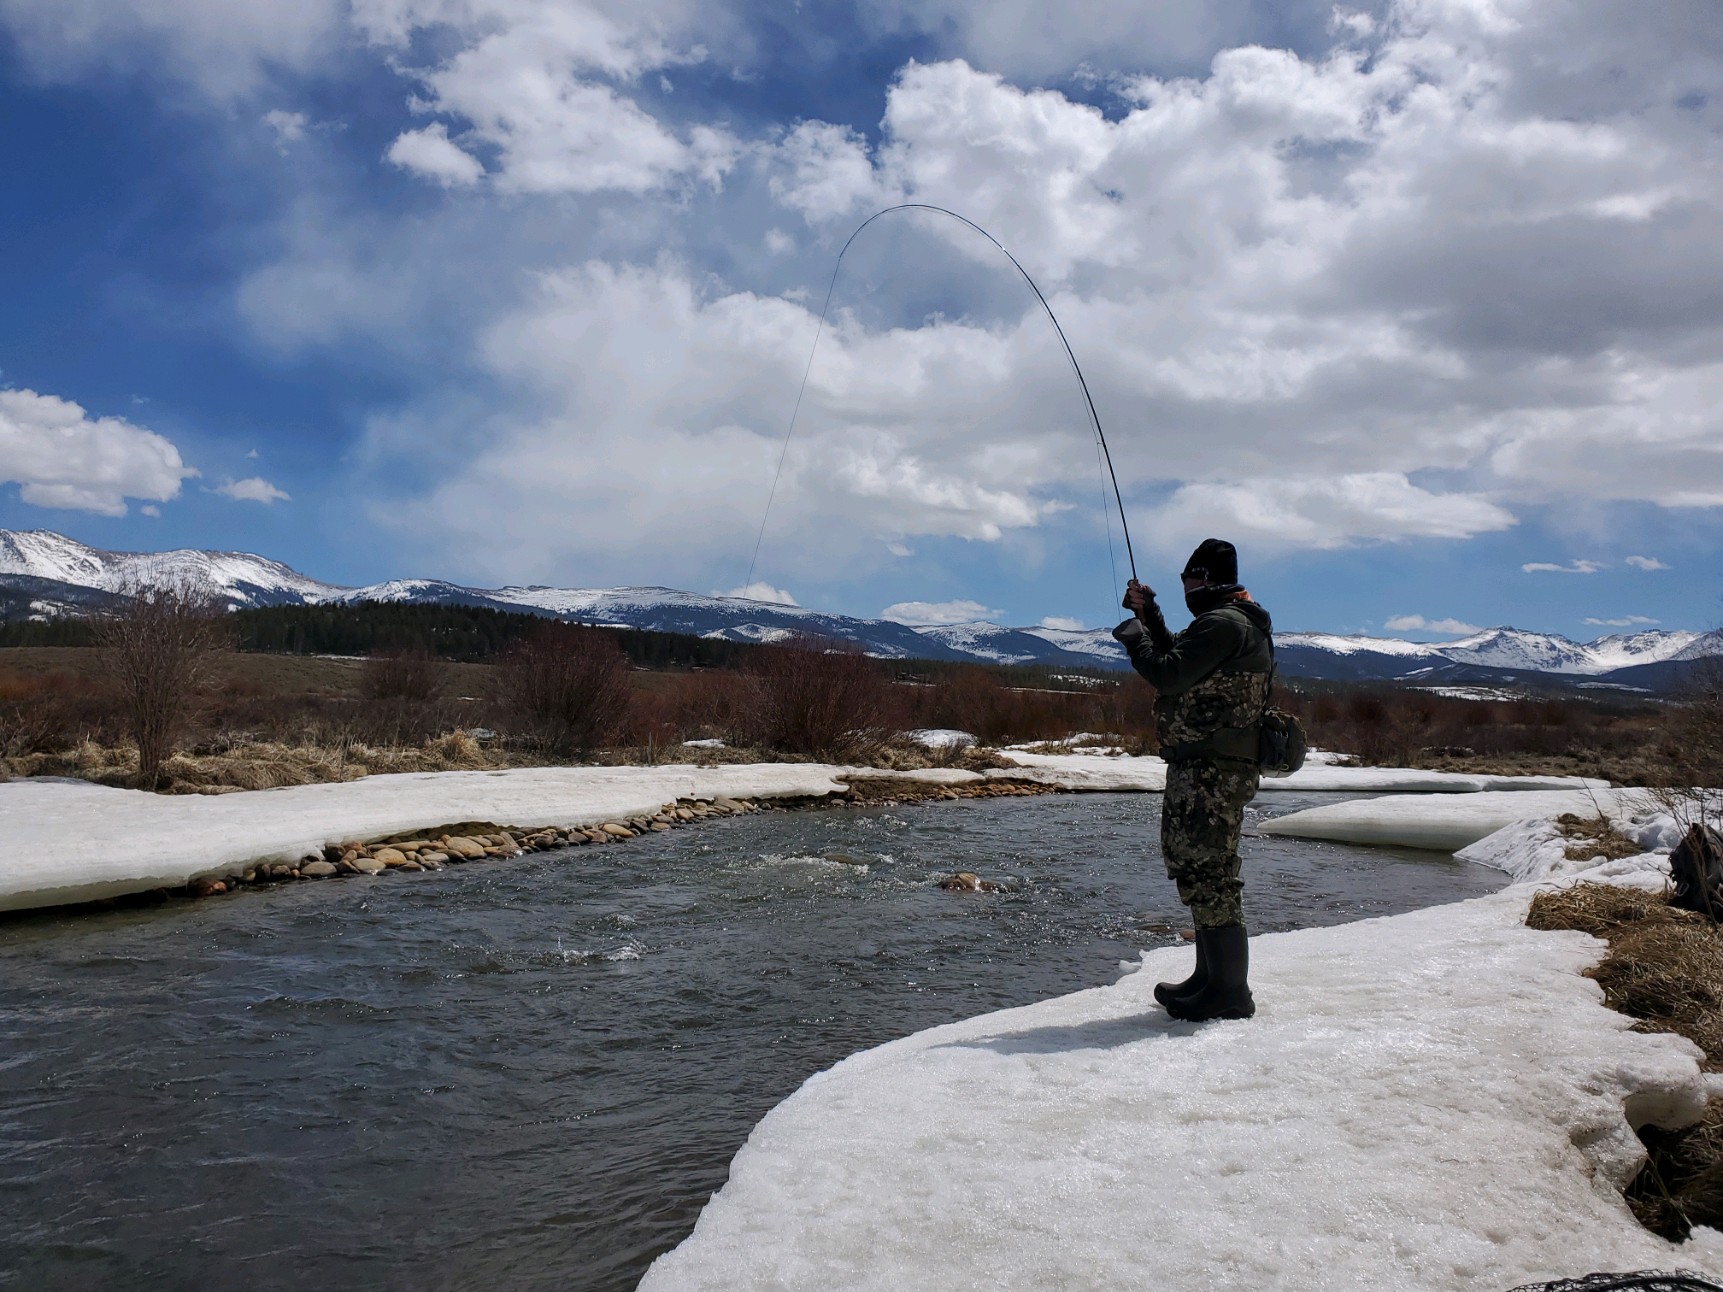 Fly Fishing Channel - The World's Best Fly Fishing Videos